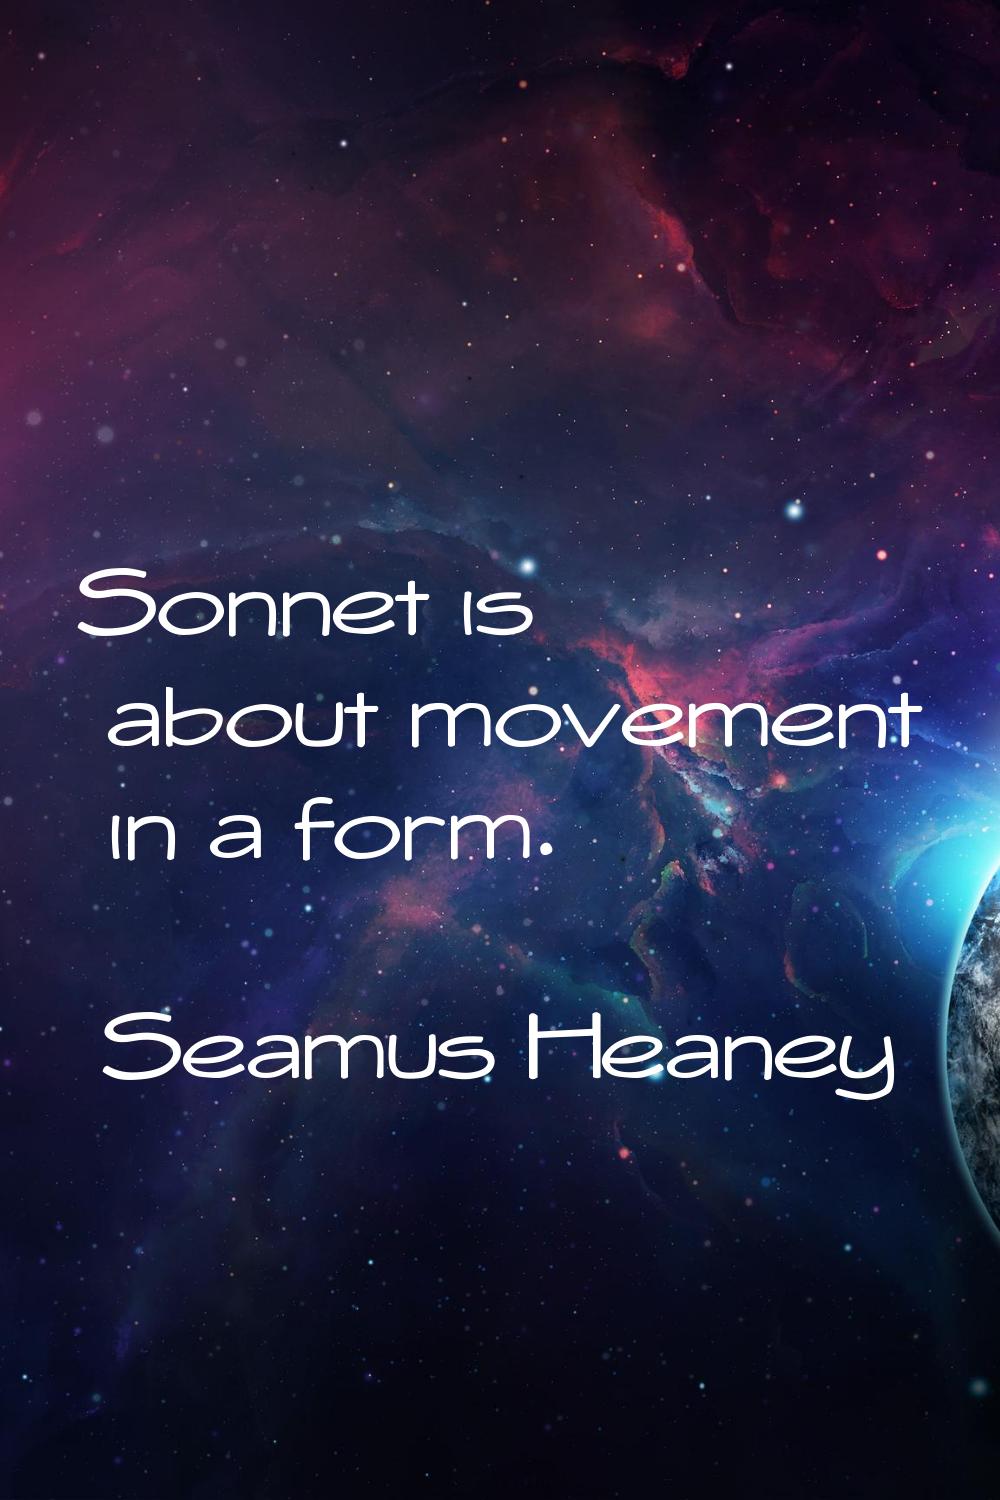 Sonnet is about movement in a form.